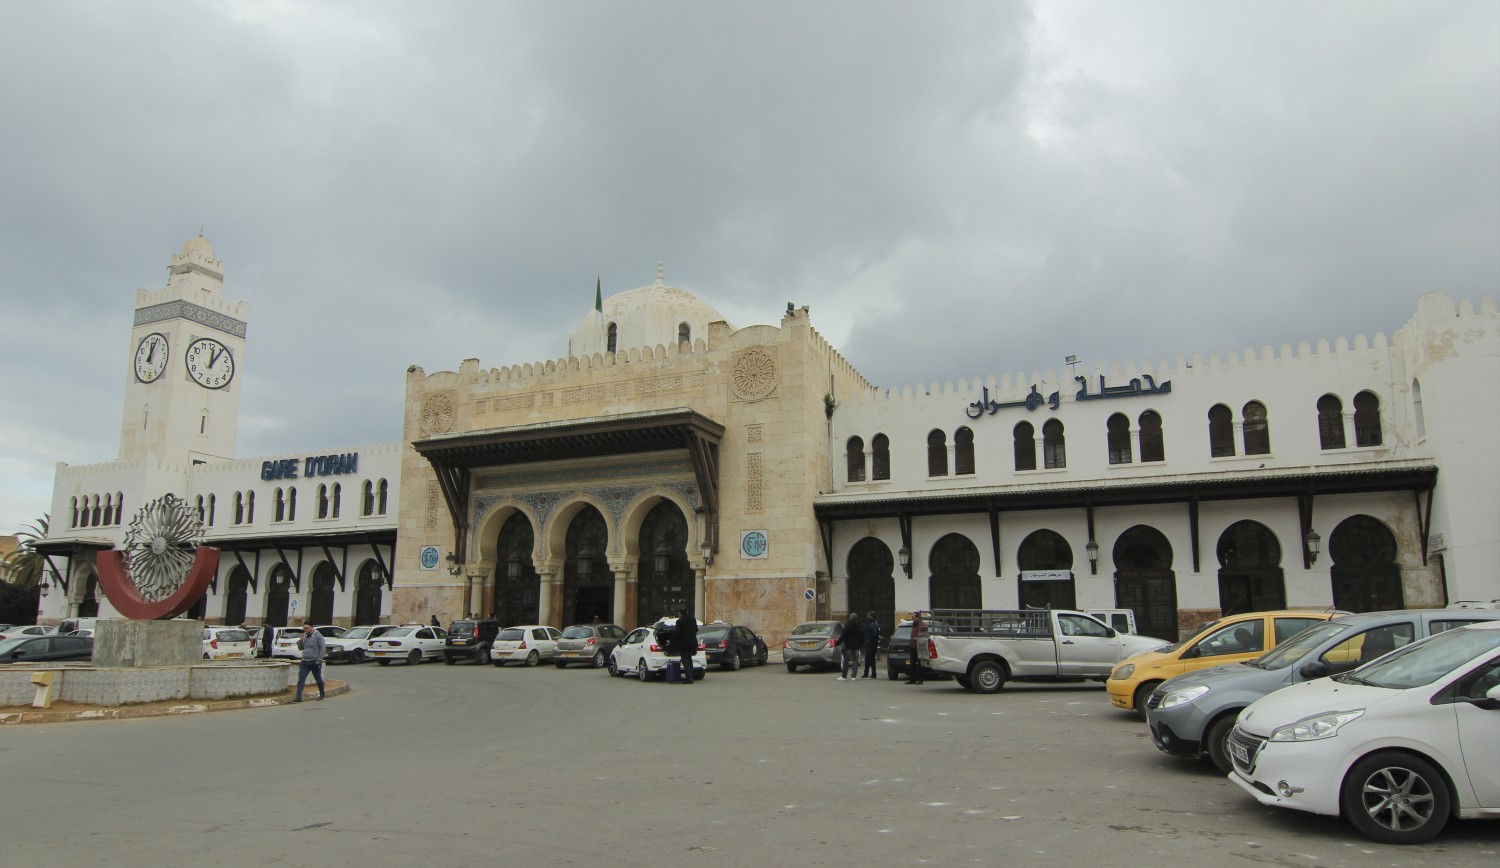 Full view of the train station showing the main entrance and minaret-style clock tower